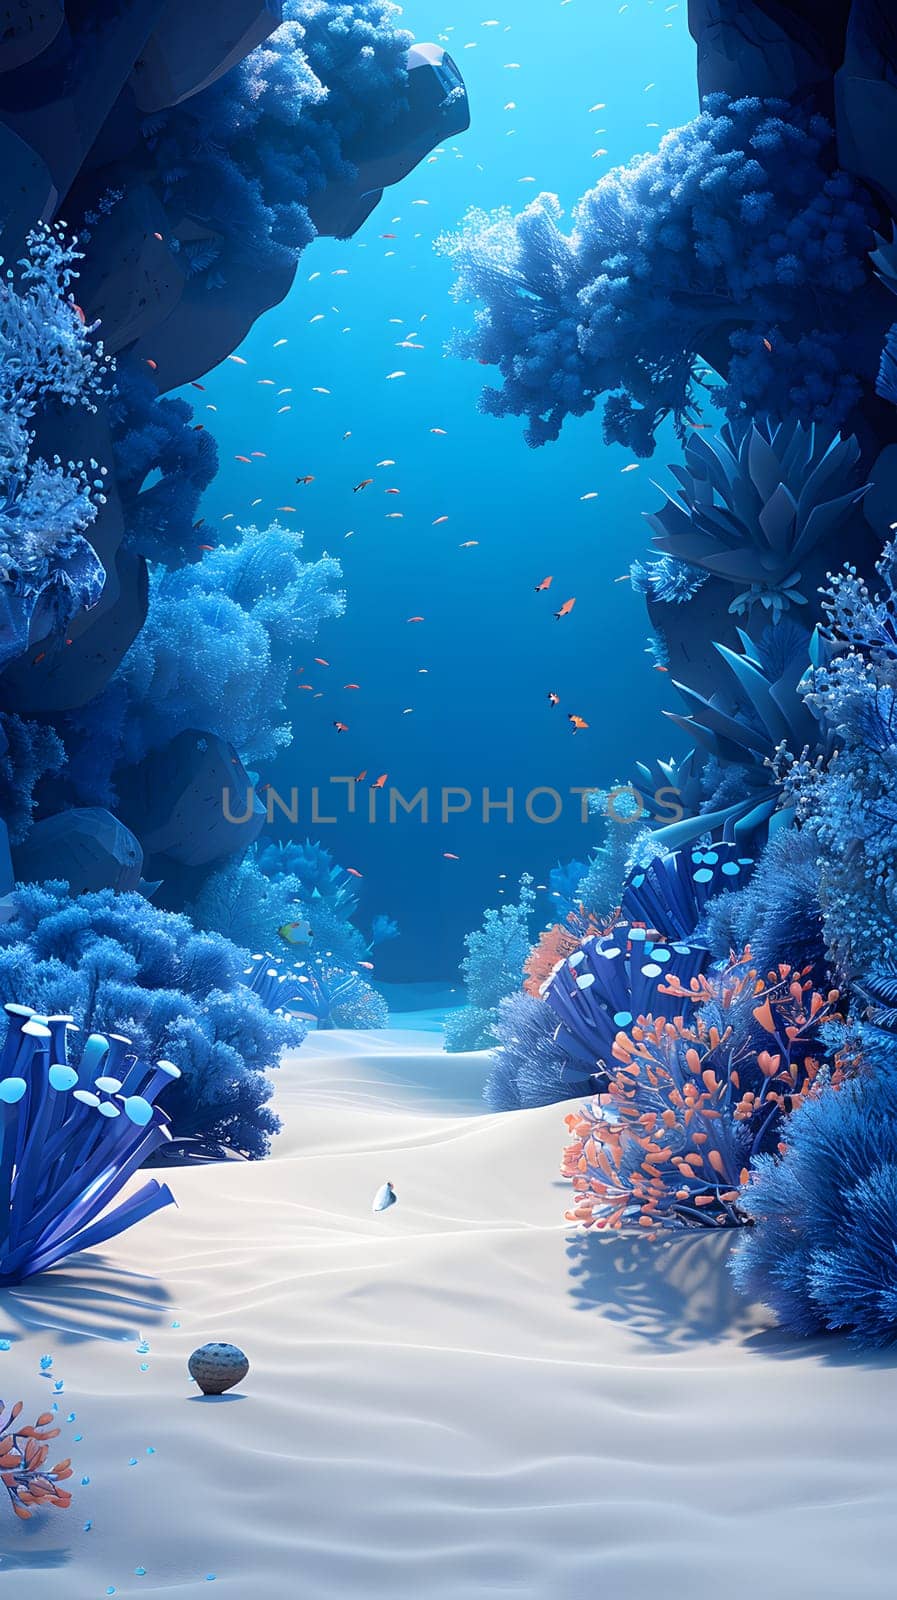 An underwater natural landscape with a freezing azure water filled with colorful corals, fish, and marine biology, creating a geological phenomenon in the ocean